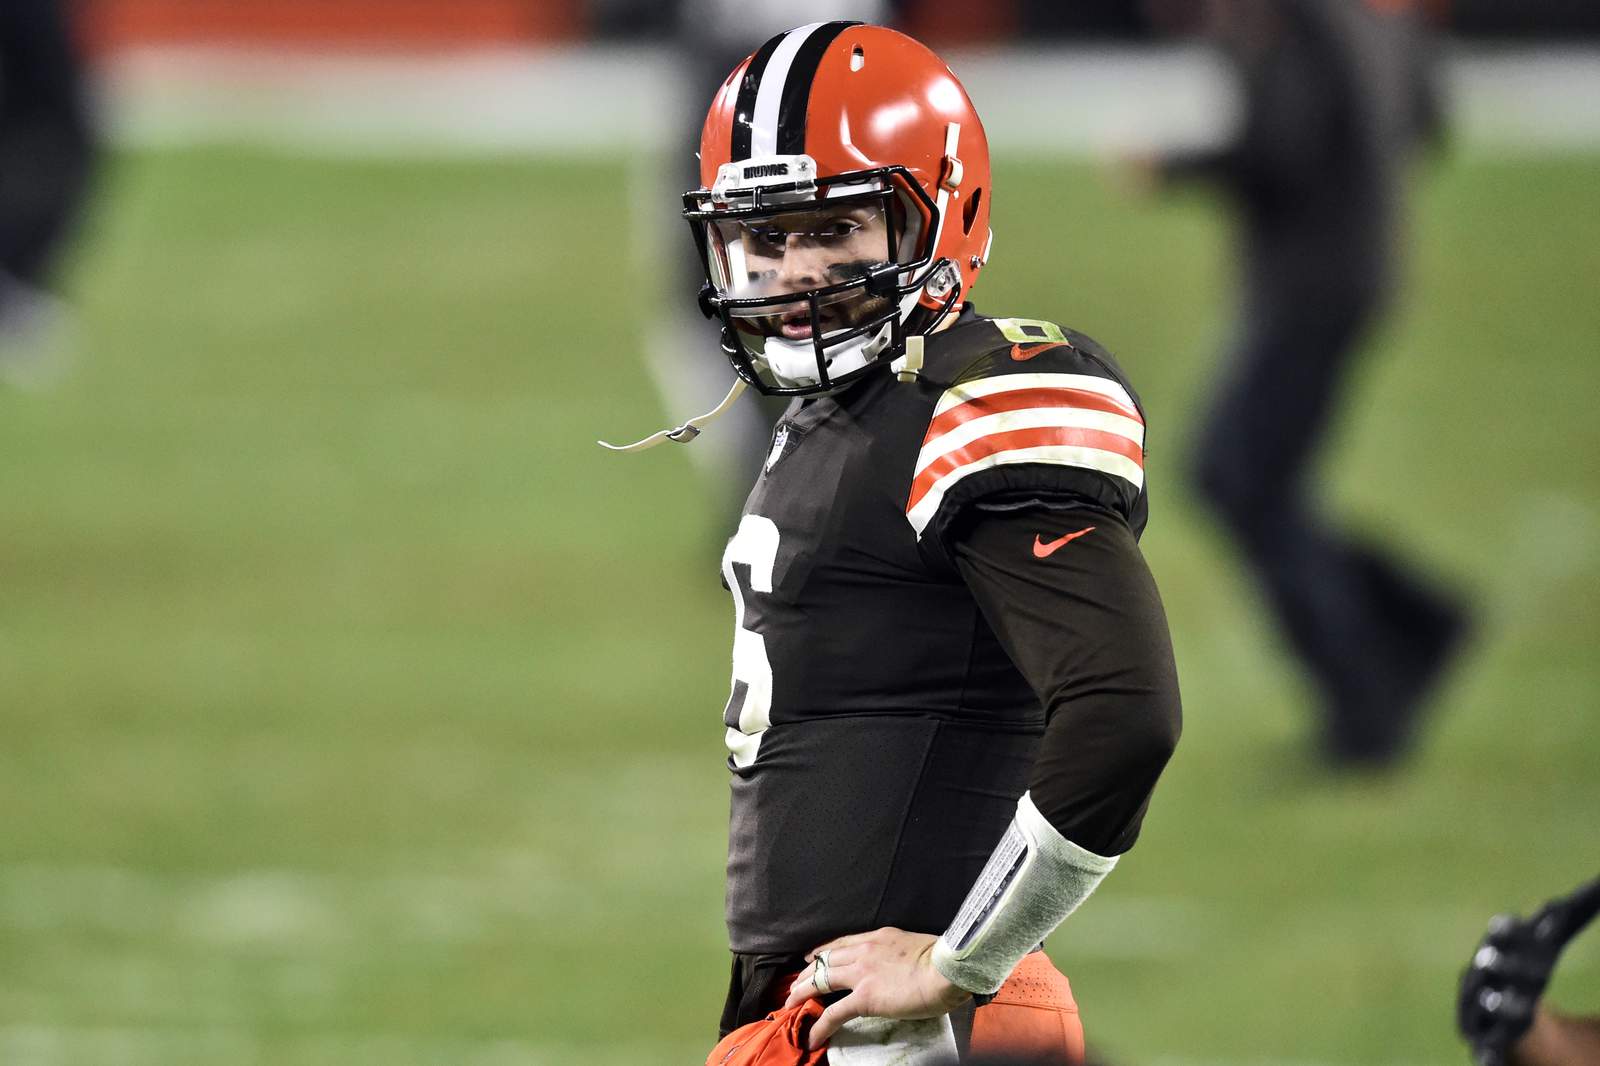 Browns can't contain Jackson, lose heartbreaker to Ravens